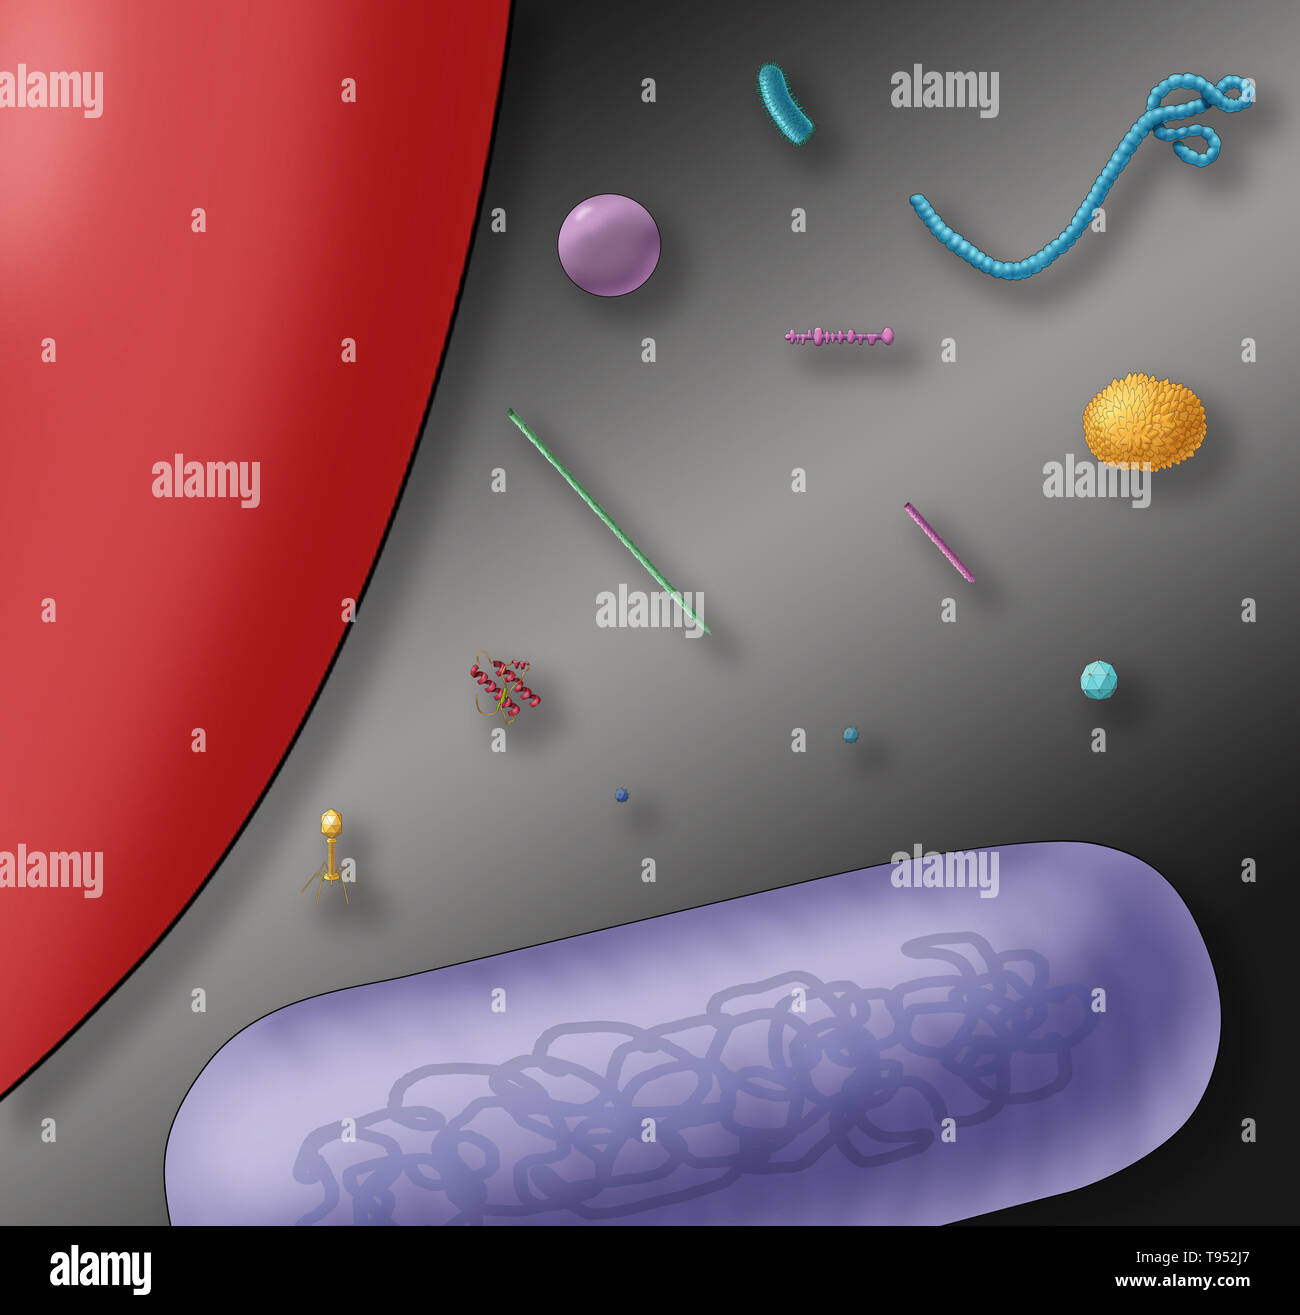 Illustration showing the relative sizes of a red blood cell (left), bacteria (purple, bottom) and various viruses. Stock Photo